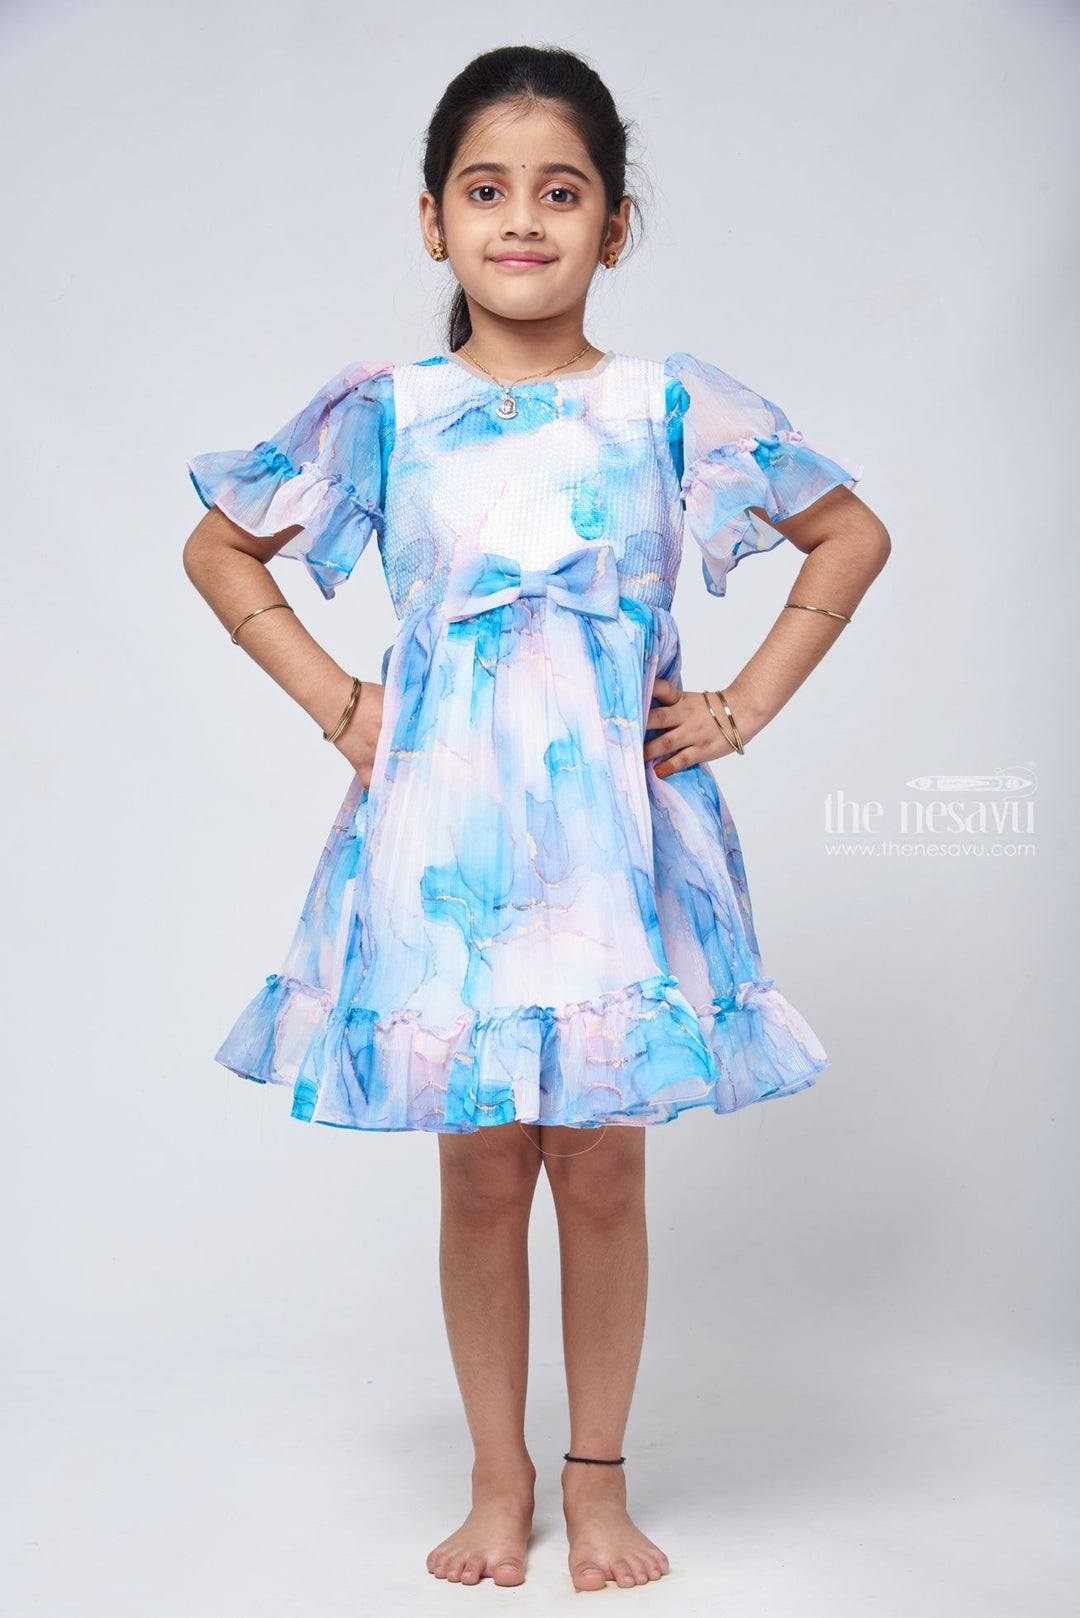 The Nesavu Girls Fancy Frock Designer Wear Chiffon Frock Embellished with Sequin Work for Kids Nesavu 16 (1Y) / Blue / Organza GFC1120B-16 Boutique Princess Dress - Ideal For Casual Outings & Special Moments | The Nesavu